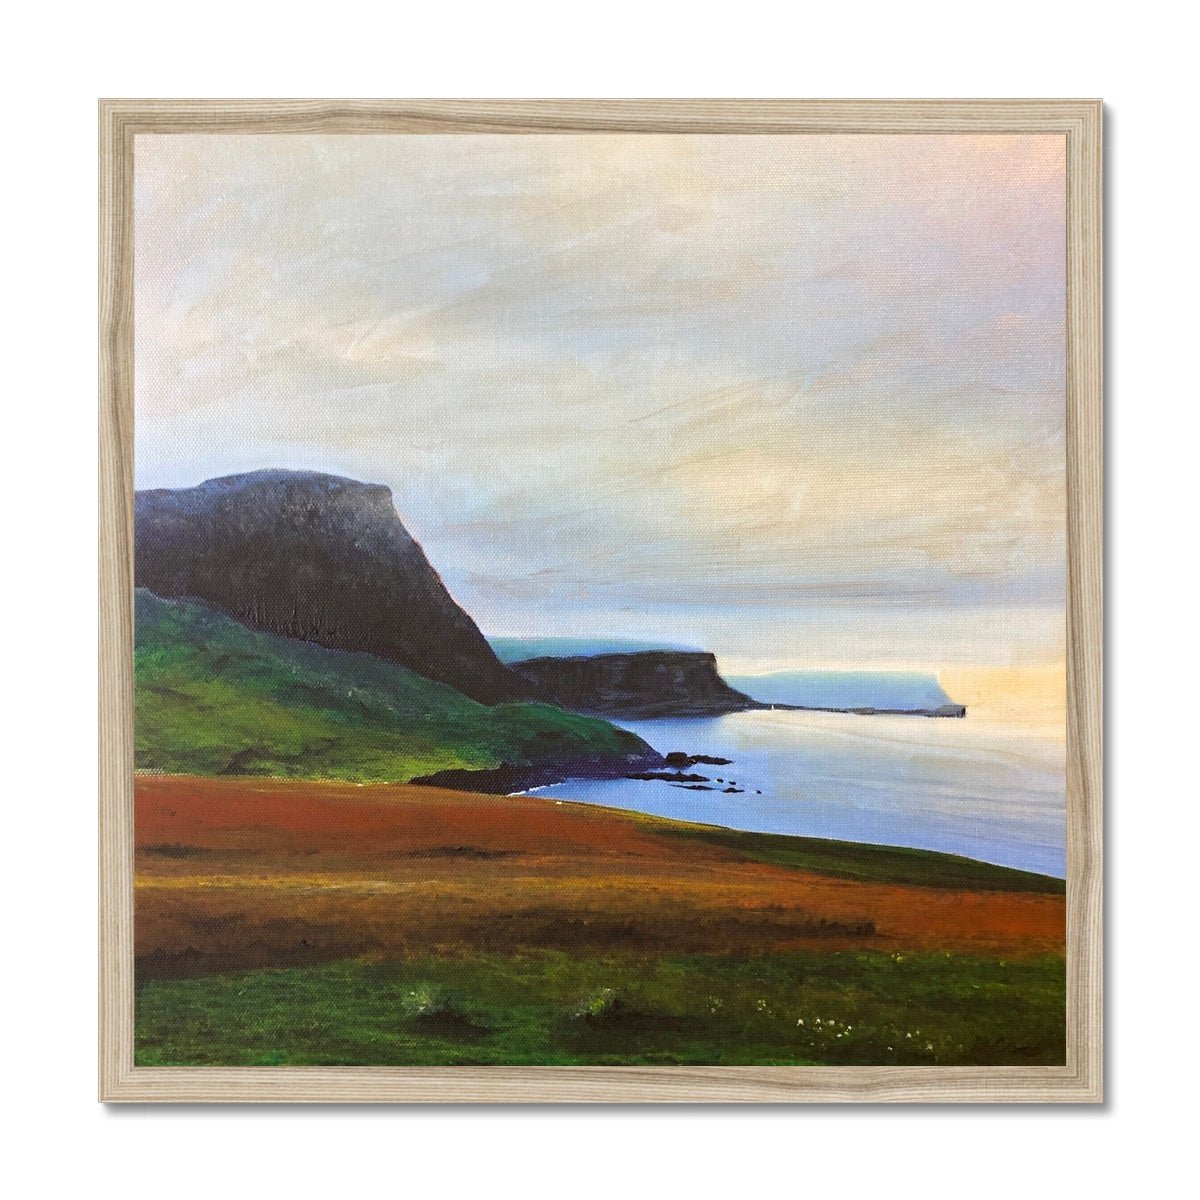 Neist Point Cliffs Skye Painting | Framed Prints From Scotland-Framed Prints-Skye Art Gallery-20"x20"-Natural Frame-Paintings, Prints, Homeware, Art Gifts From Scotland By Scottish Artist Kevin Hunter